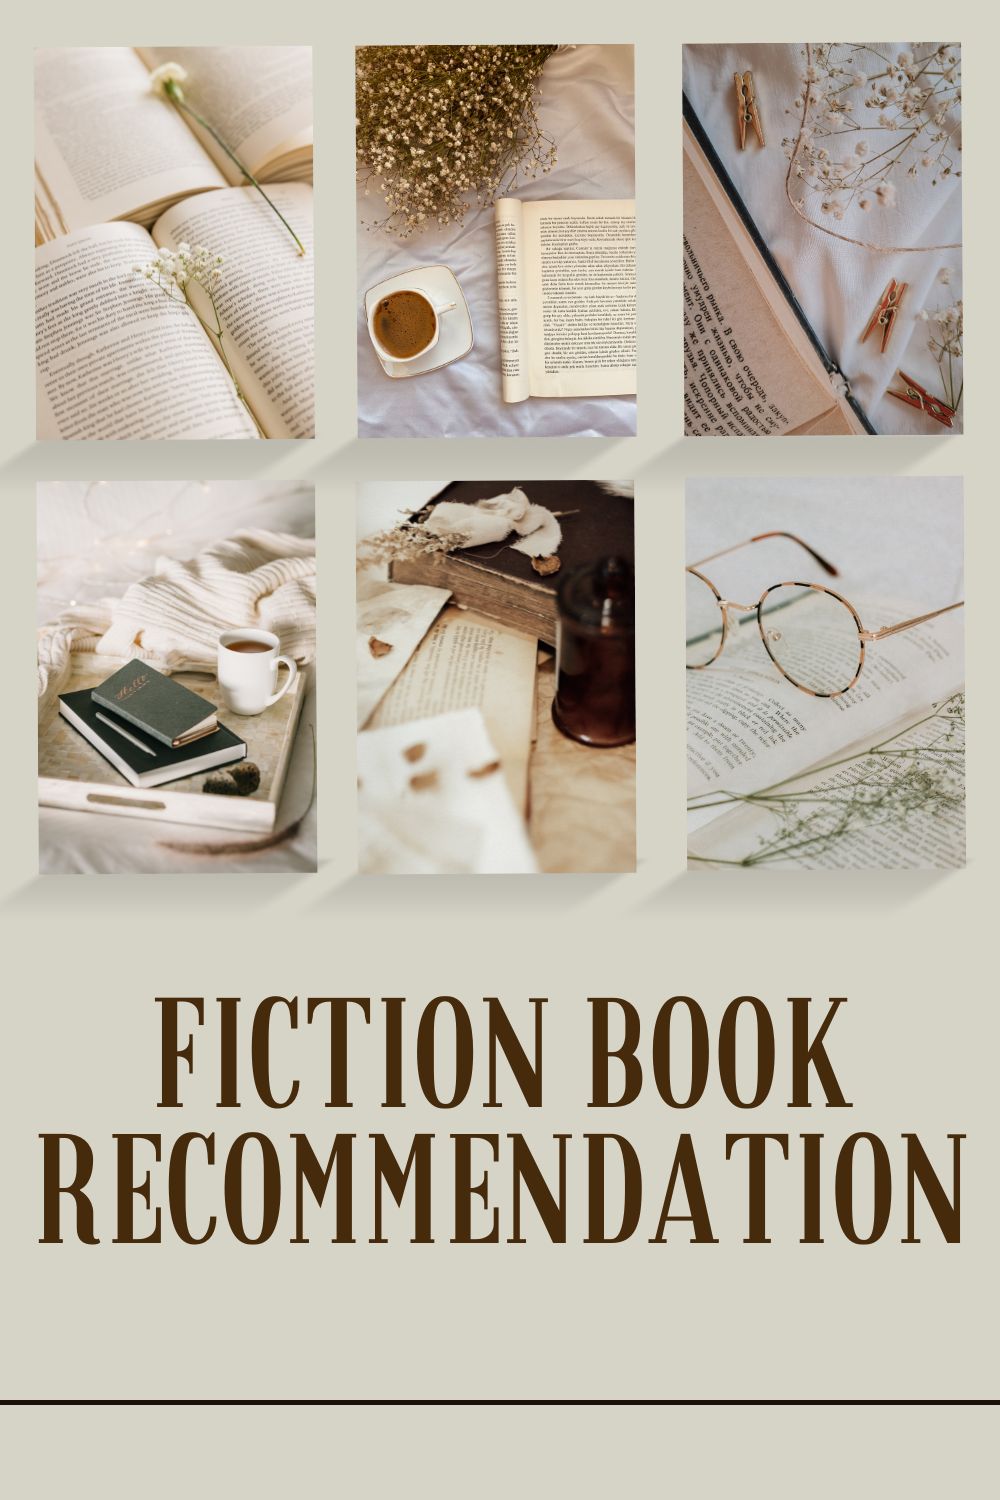 Fiction book recommendation – books that changed my life